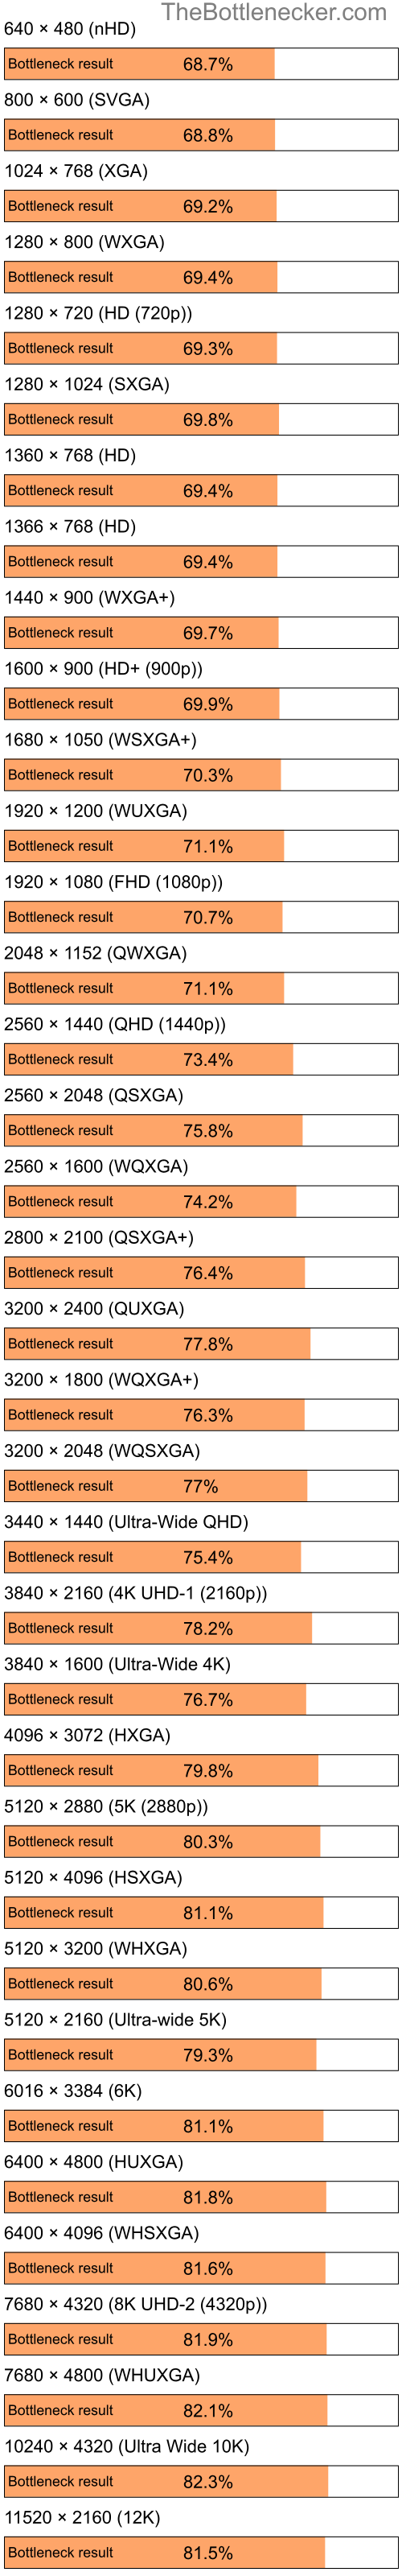 Bottleneck results by resolution for Intel Atom Z520 and AMD Mobility Radeon X1700 in Graphic Card Intense Tasks